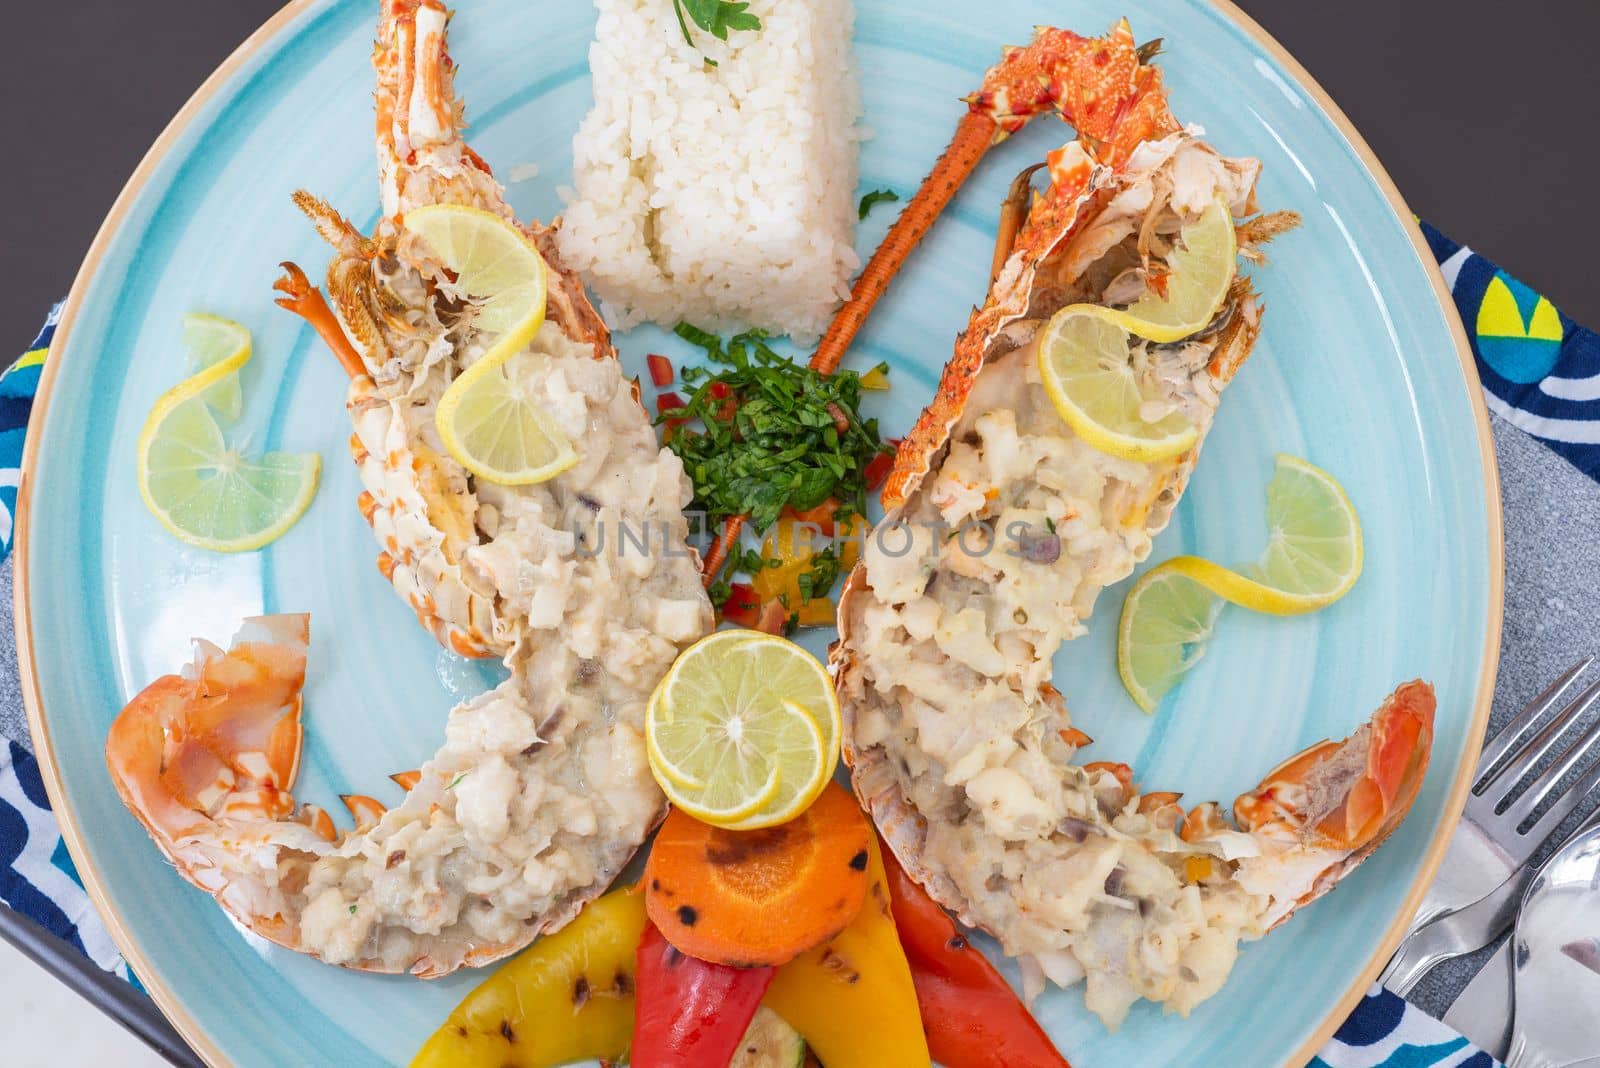 Lobster dish a la carte meal with white rice and vegetables by paulvinten